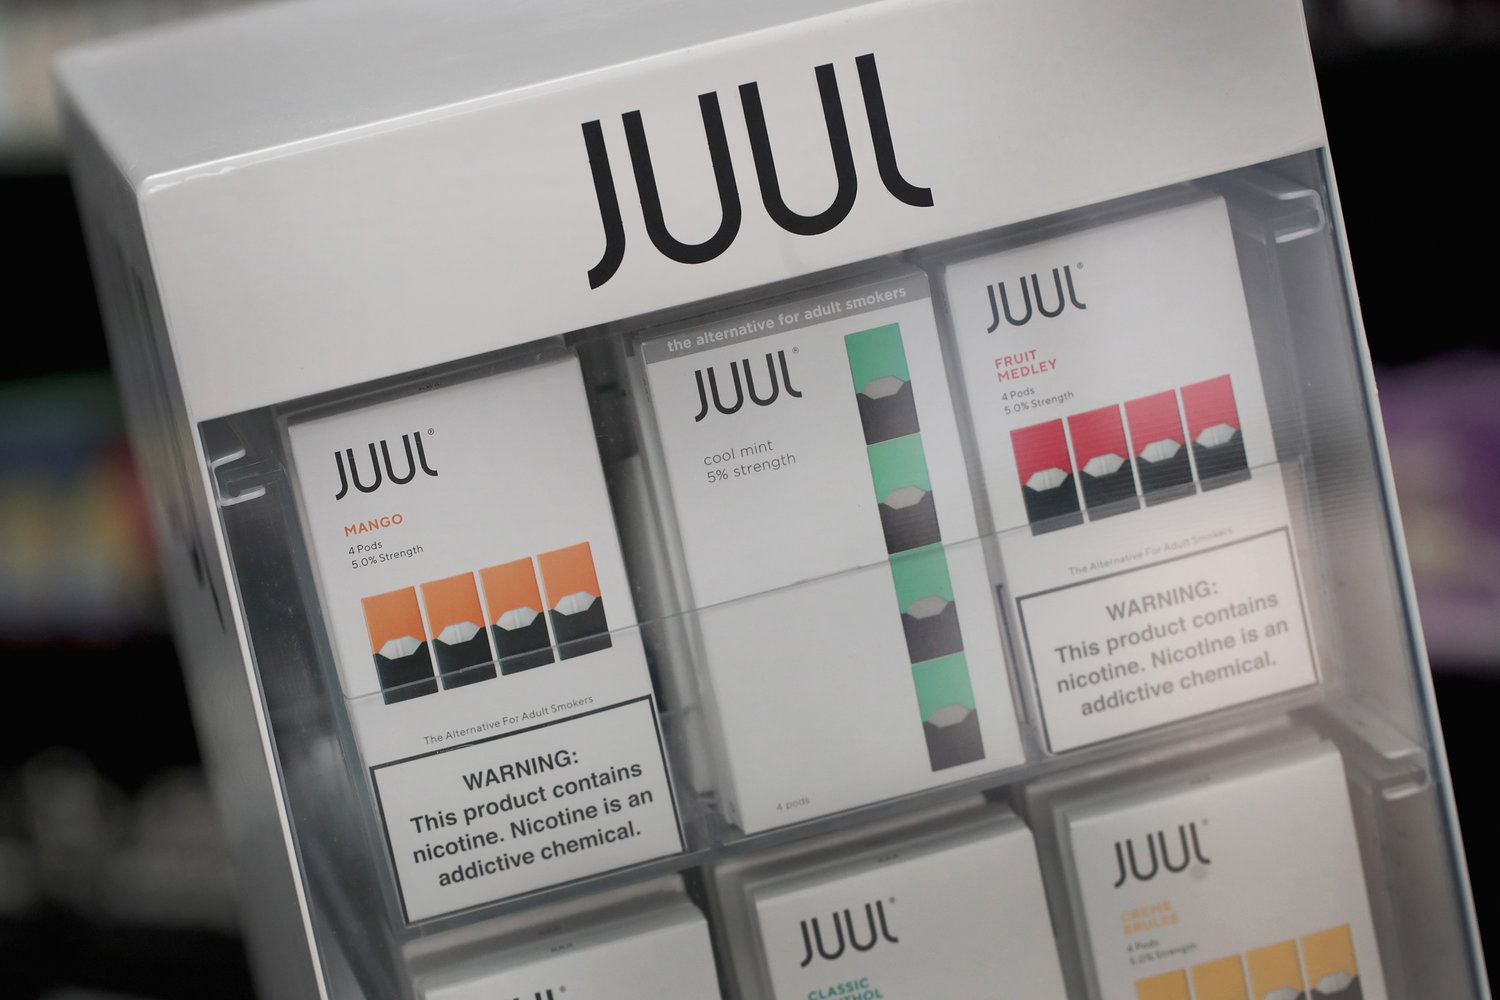 On June 23, 2022, the Food and Drug Administration ordered Juul to remove its remaining products from the market. (Scott Olson/Getty Images/TNS)